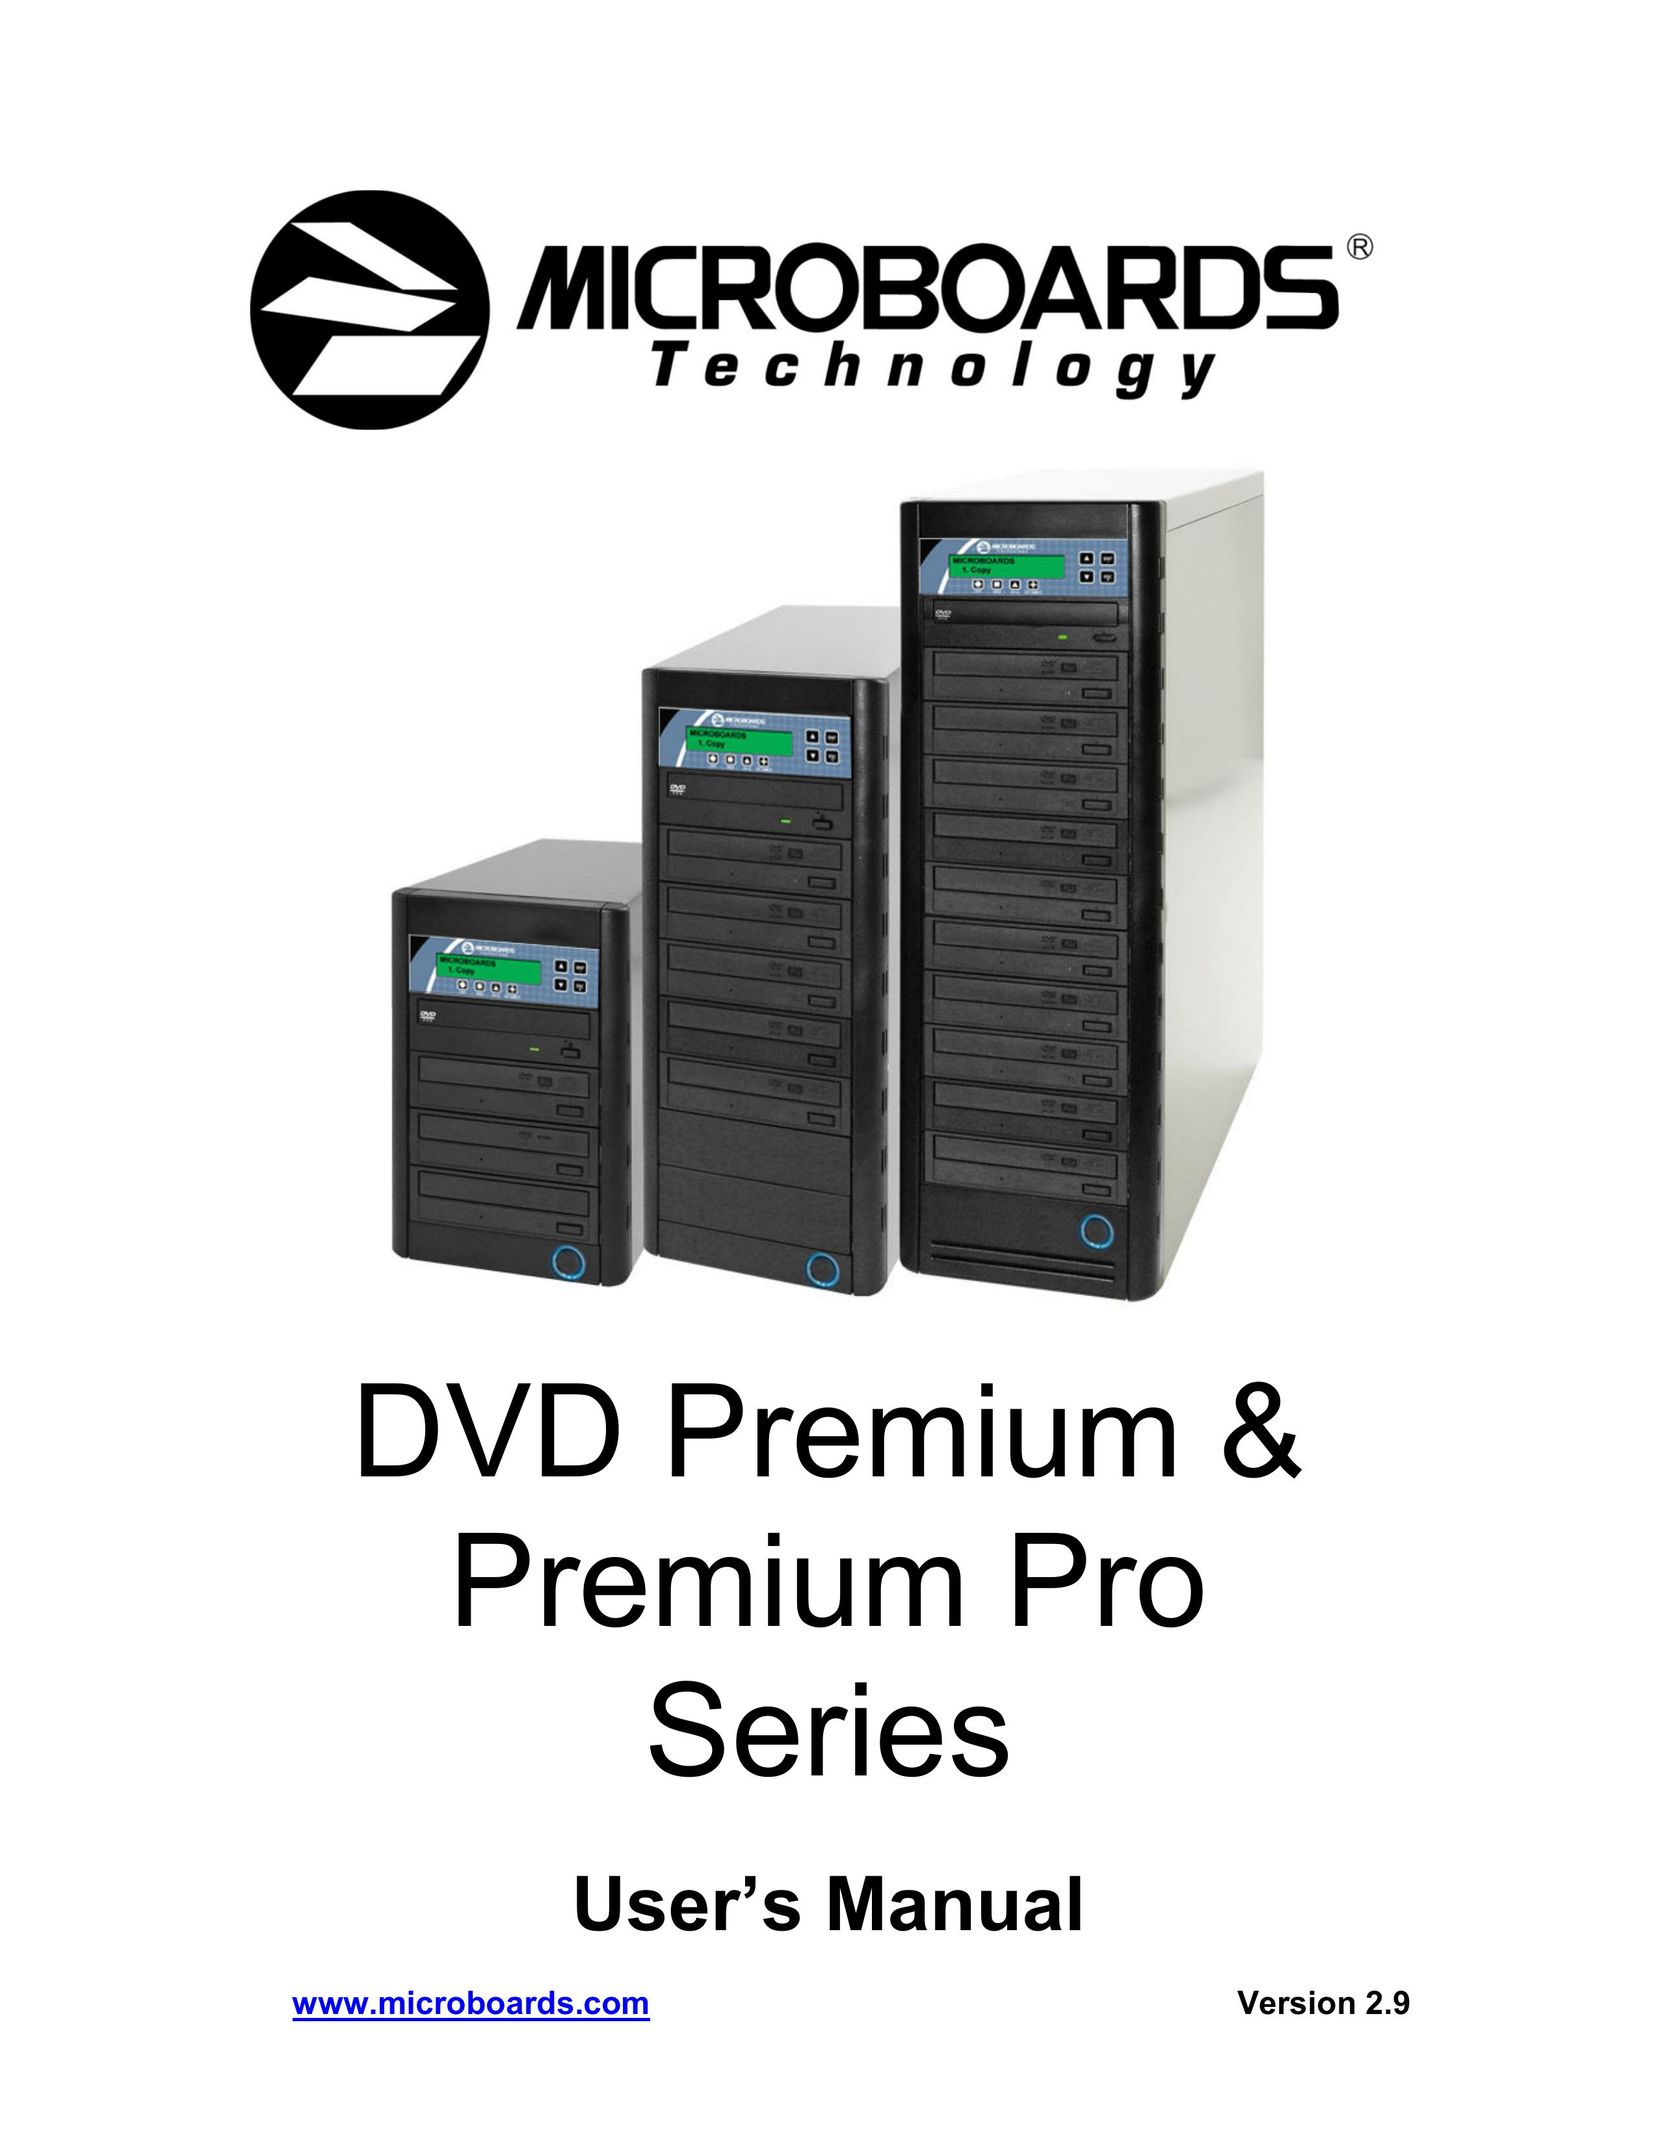 MicroBoards Technology 13556 DVD Recorder User Manual